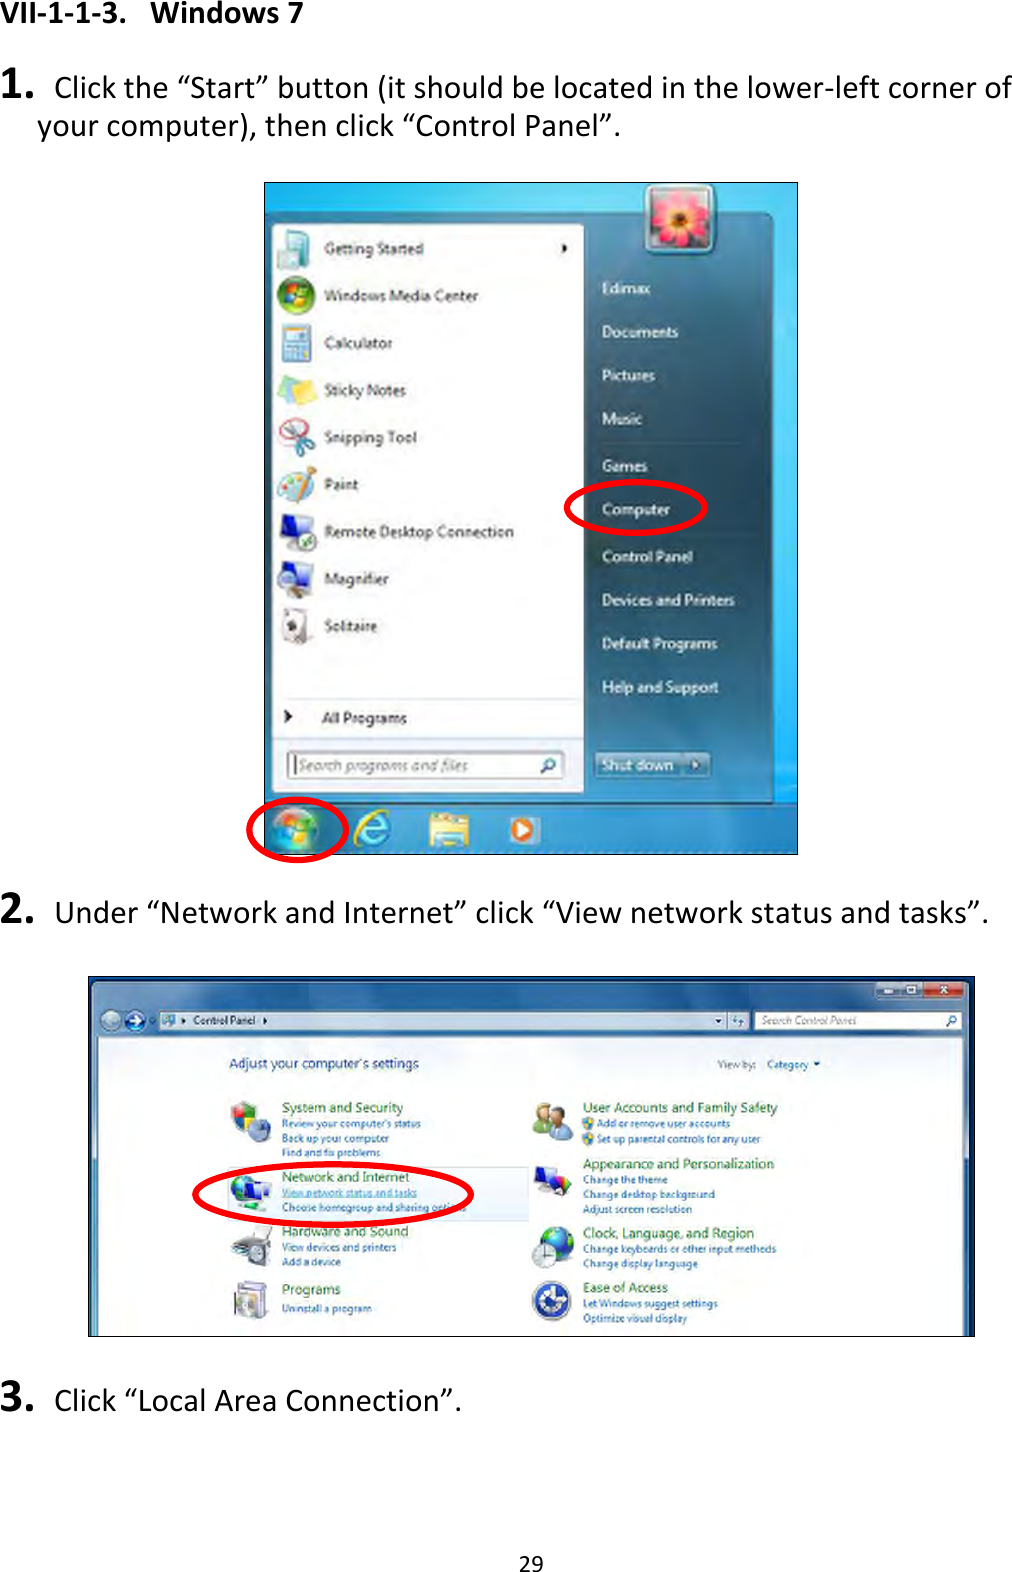 29 VII-1-1-3.  Windows 7  1.  Click the “Start” button (it should be located in the lower-left corner of your computer), then click “Control Panel”.    2.  Under “Network and Internet” click “View network status and tasks”.    3.  Click “Local Area Connection”.  